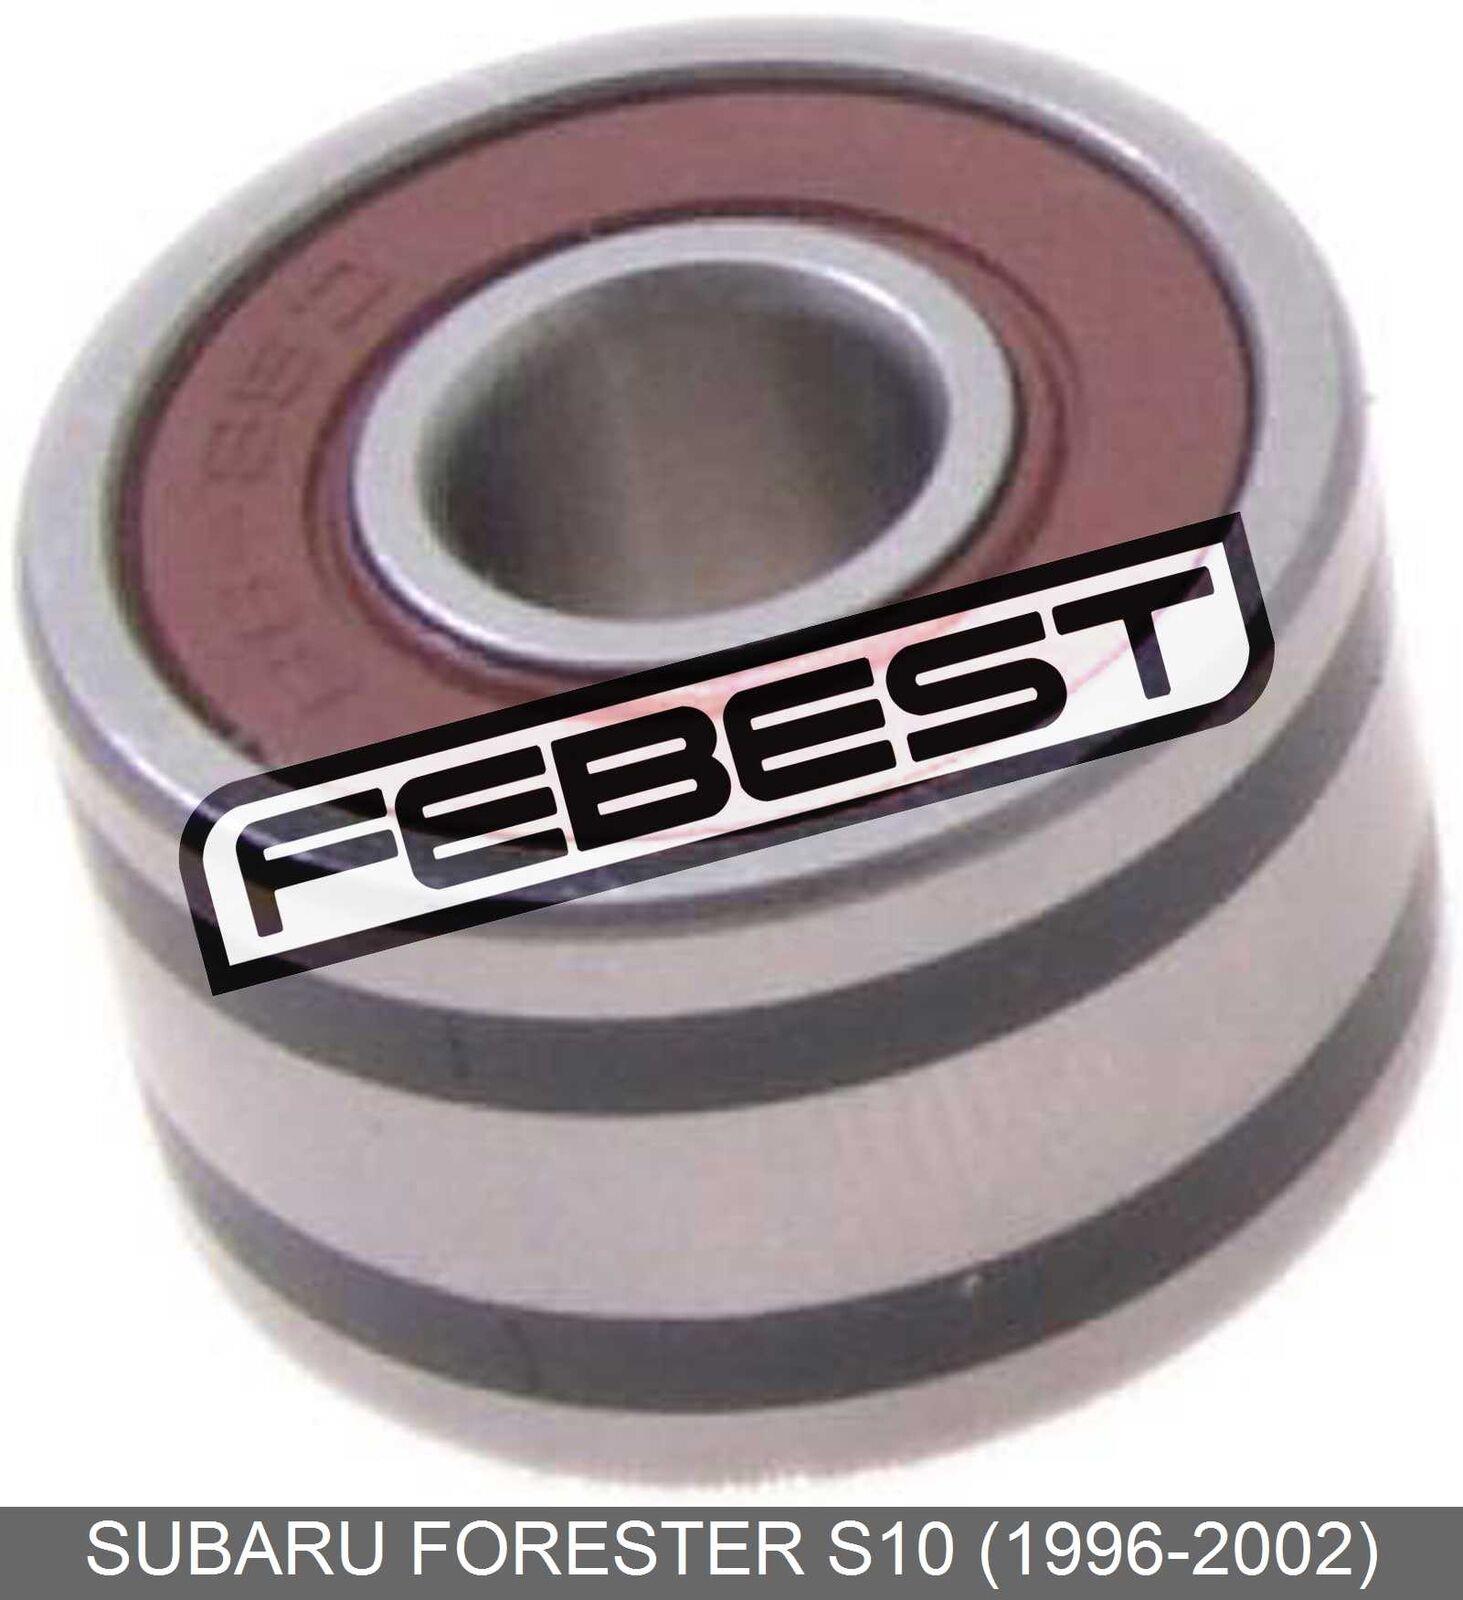 Ball Bearing 8x23x14 For Subaru Forester S10 (1996-2002)